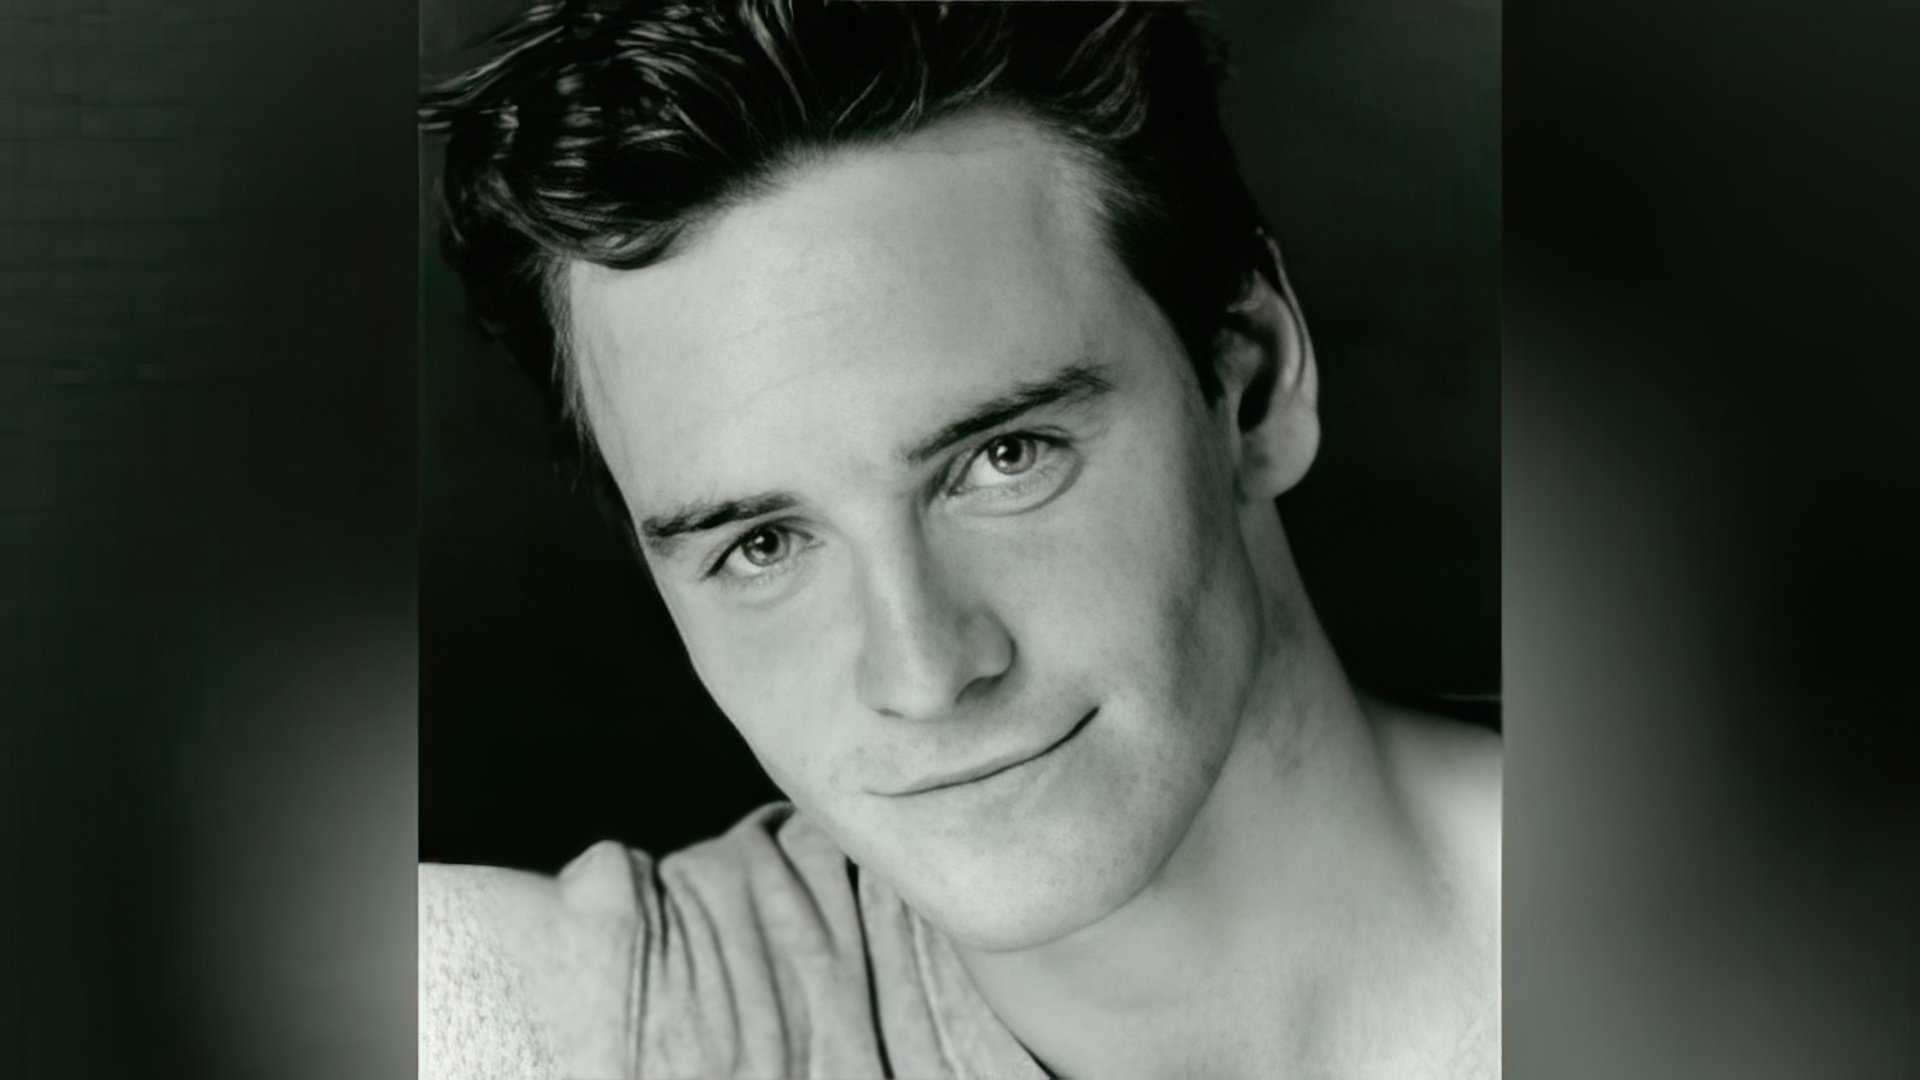 Back in college, Fassbender worked as a stripper